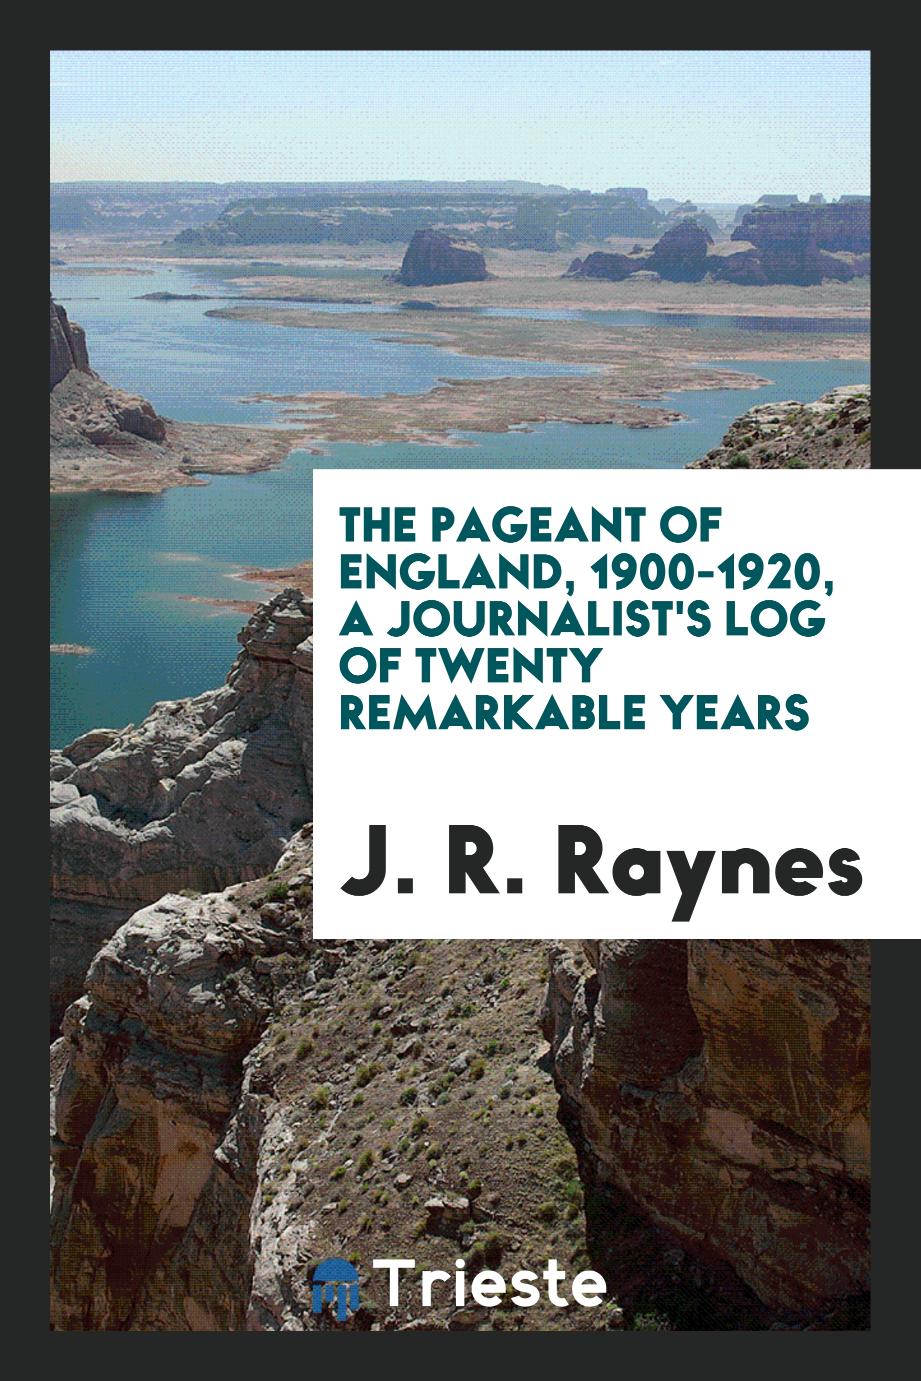 The pageant of England, 1900-1920, a journalist's log of twenty remarkable years